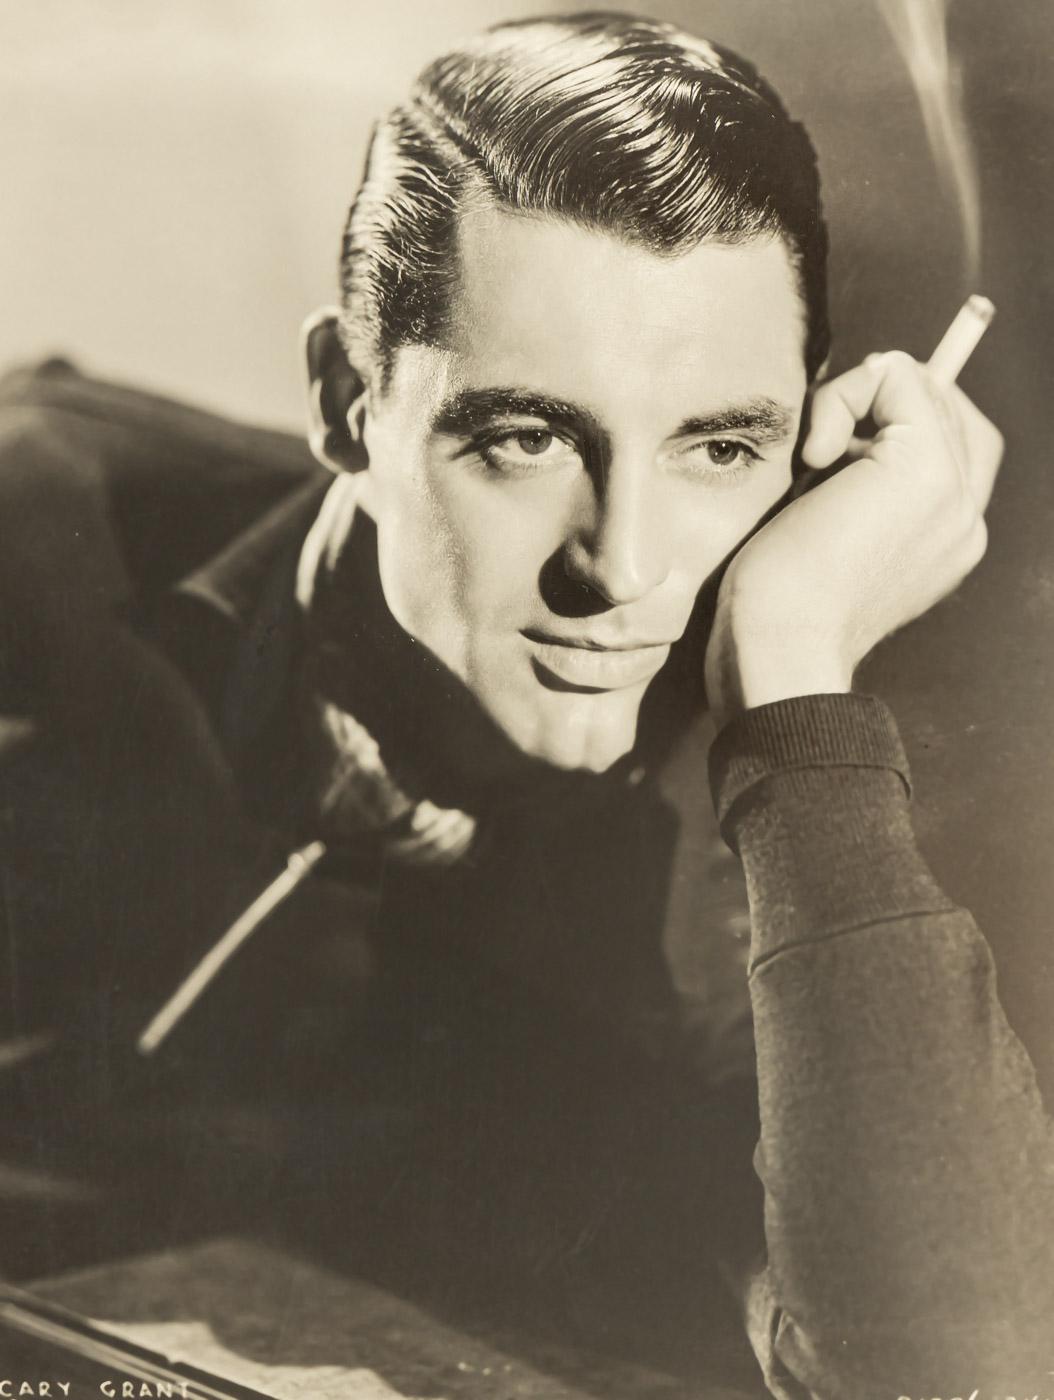 Original vintage Portrait of CARY GRANT. Paramount Studio Portrait from the 1930s showing the actor in a youthful manner with a cigarette in his hand. Framed and ready to hang with passe-partout in a natural wood frame in black behind